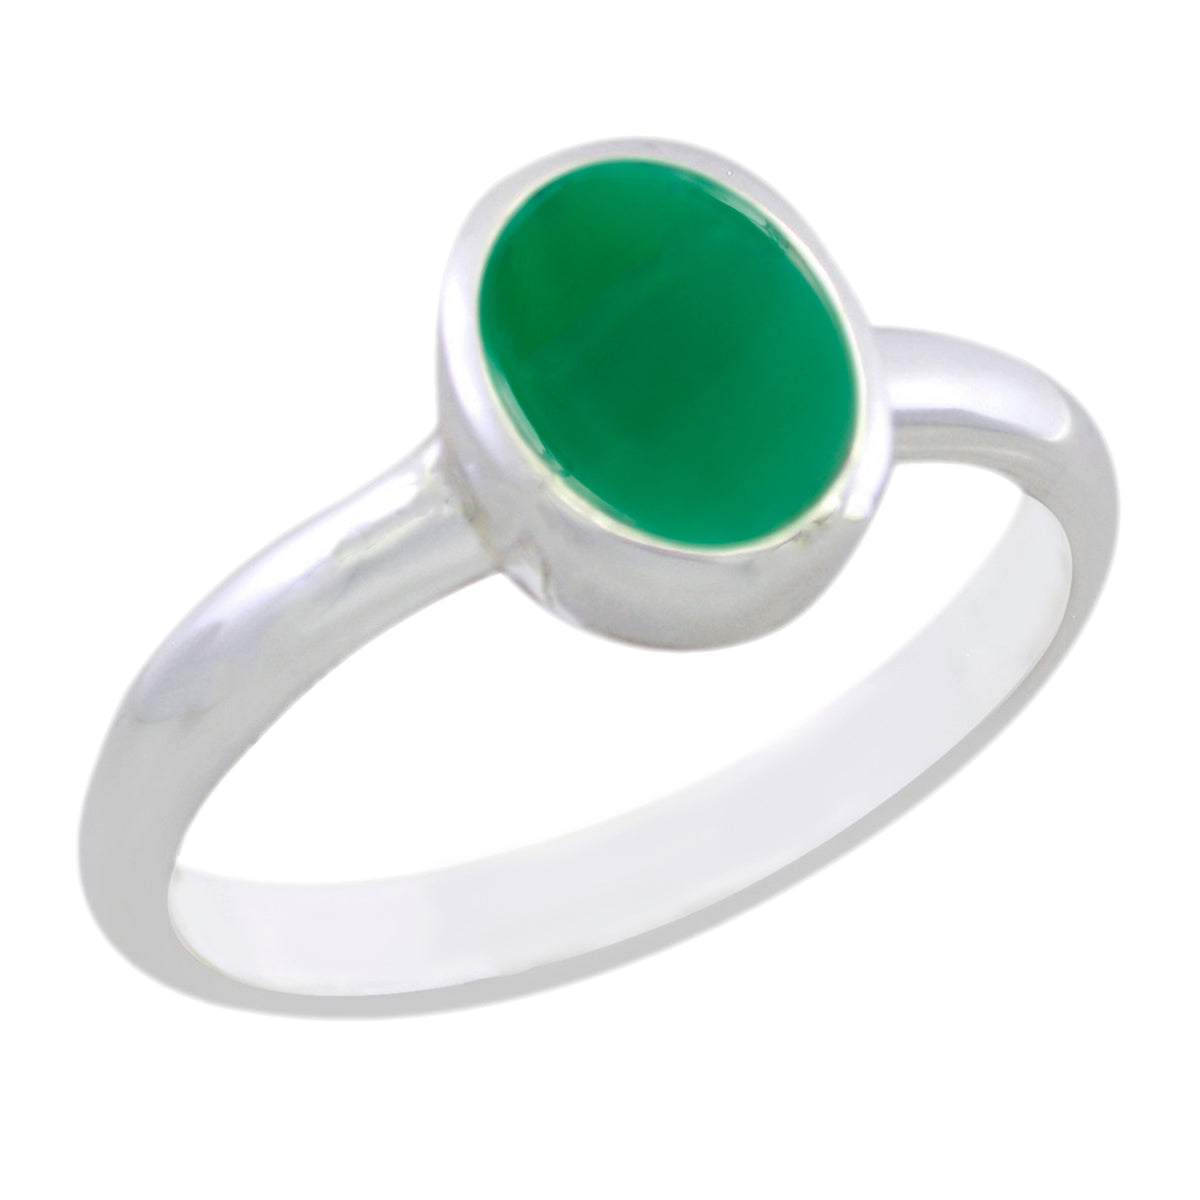 Radiant Gemstones Green Onyx Solid Silver Ring Jewelry Box Hardware